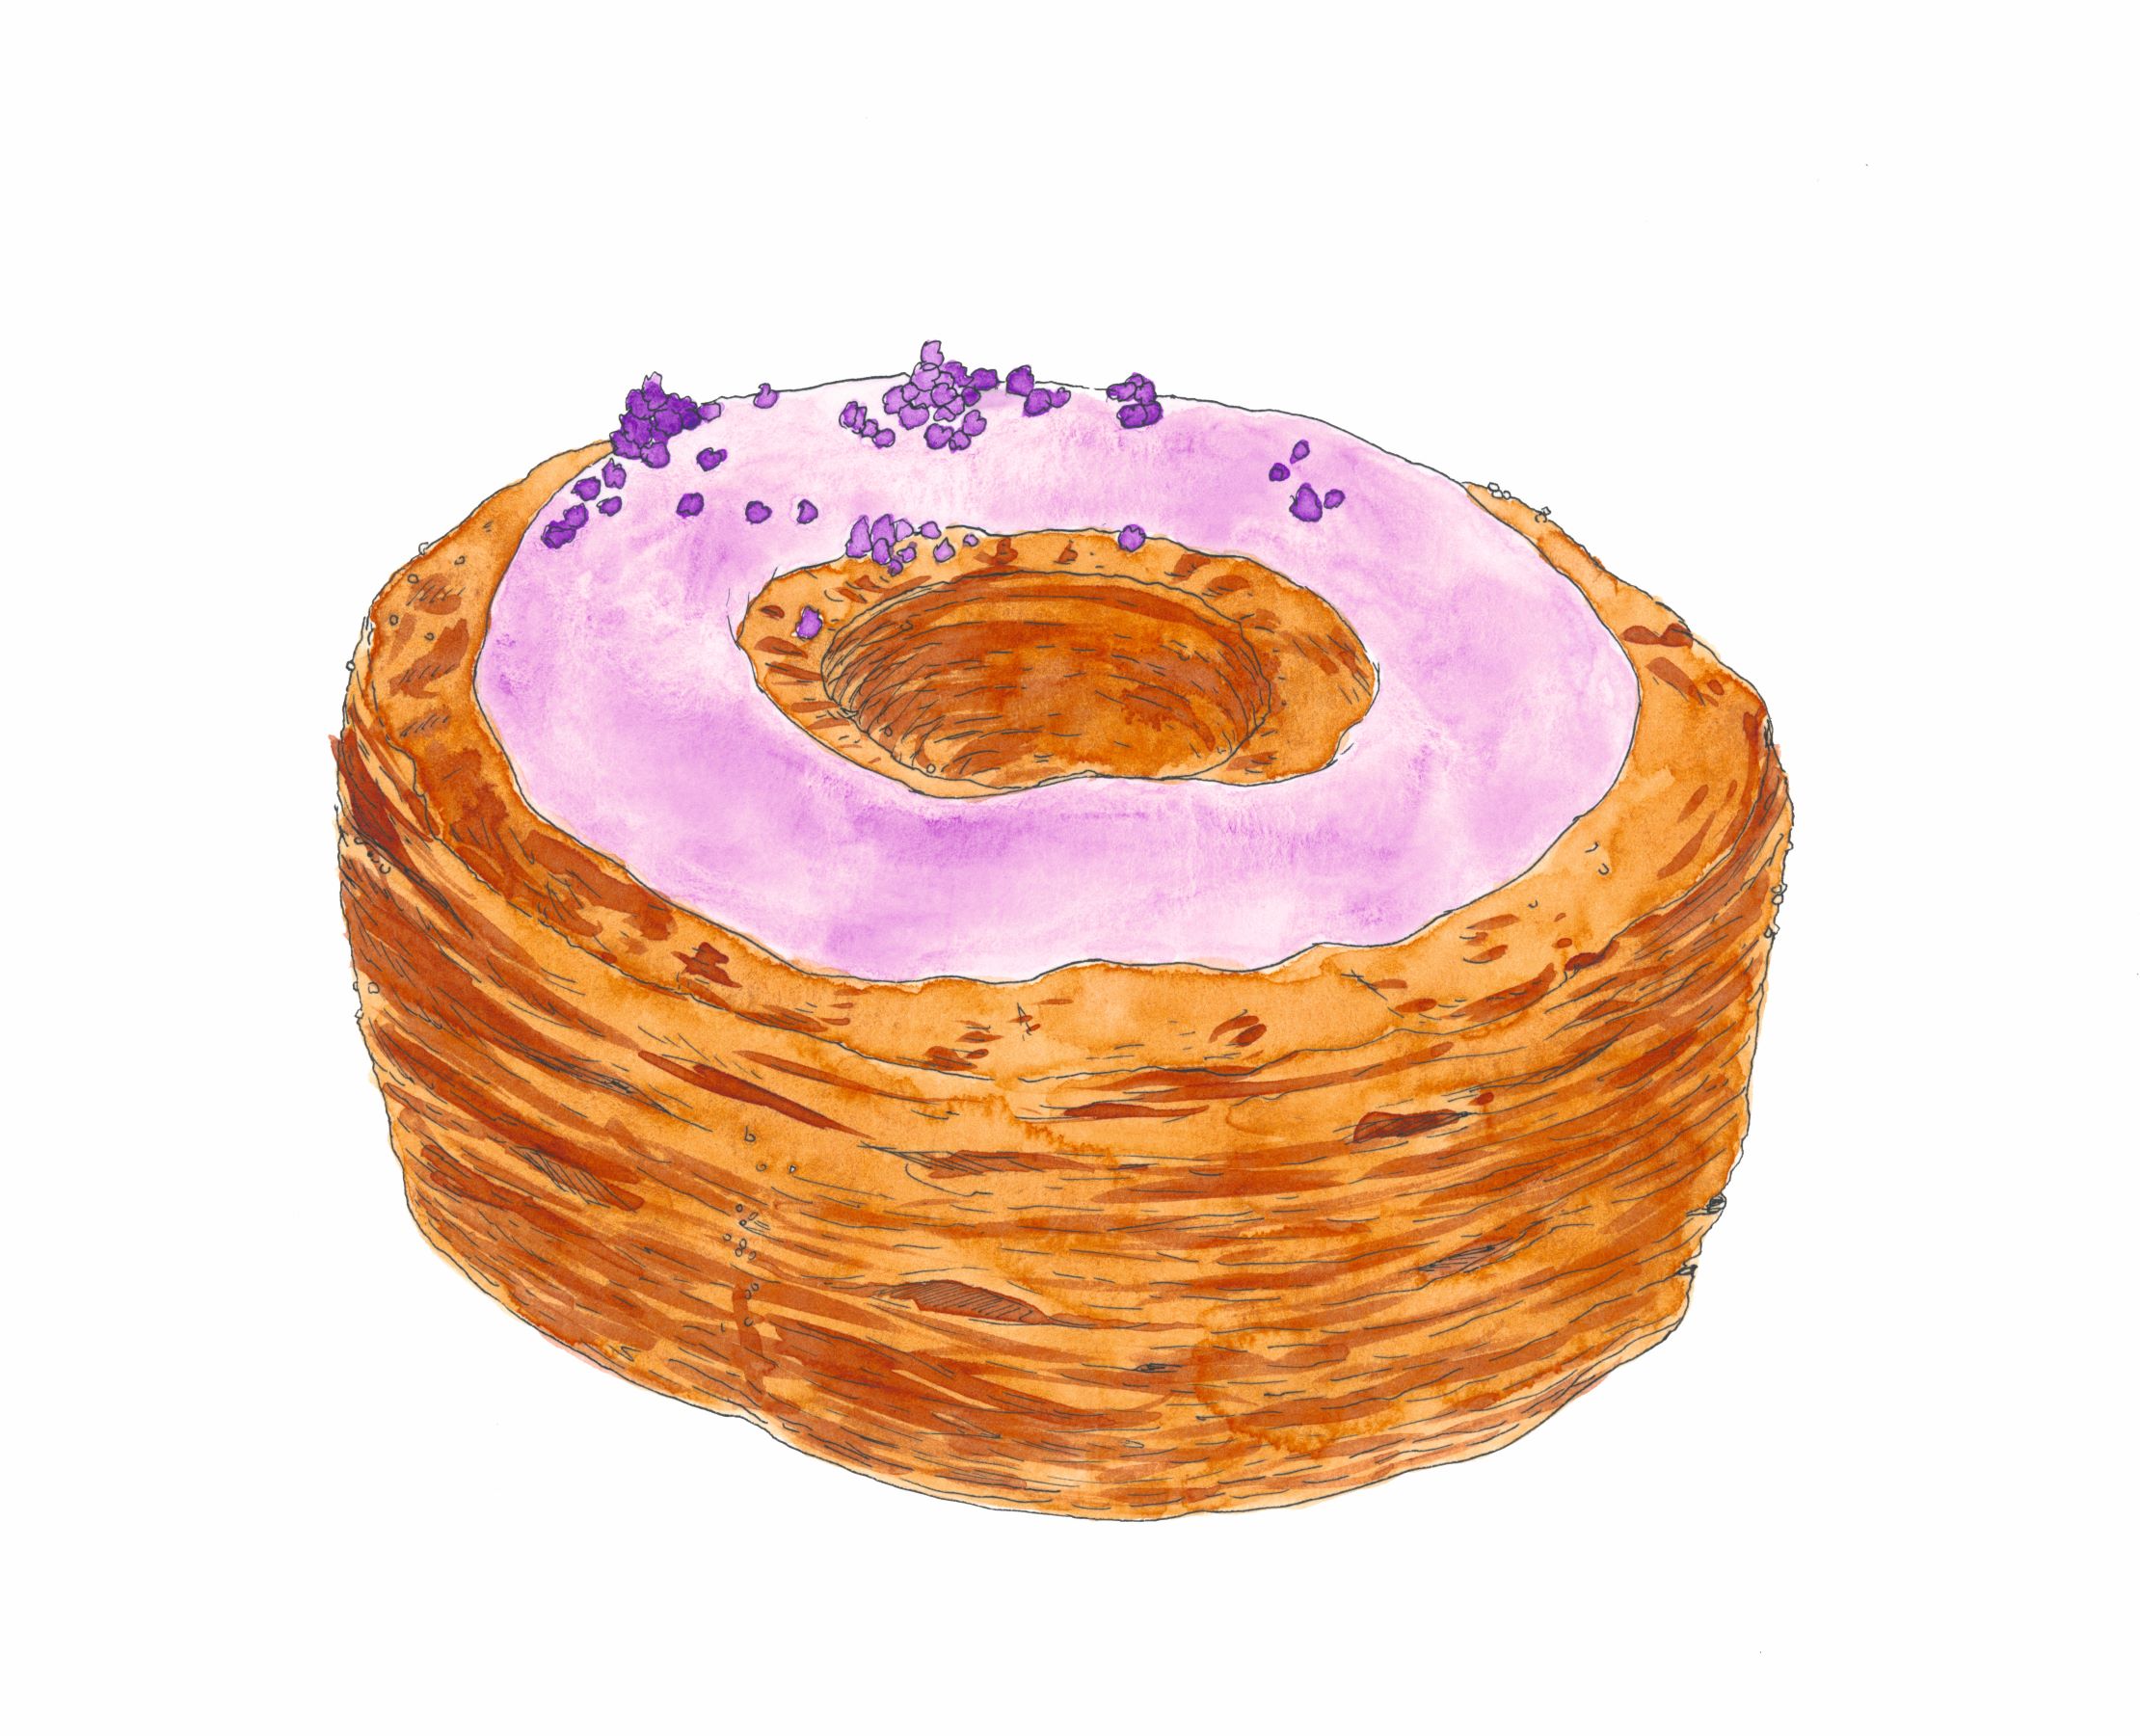 Cronut®, Dominique Ansel, Dominique Ansel Bakery, United States, 2013 - Signature Dishes That Matter